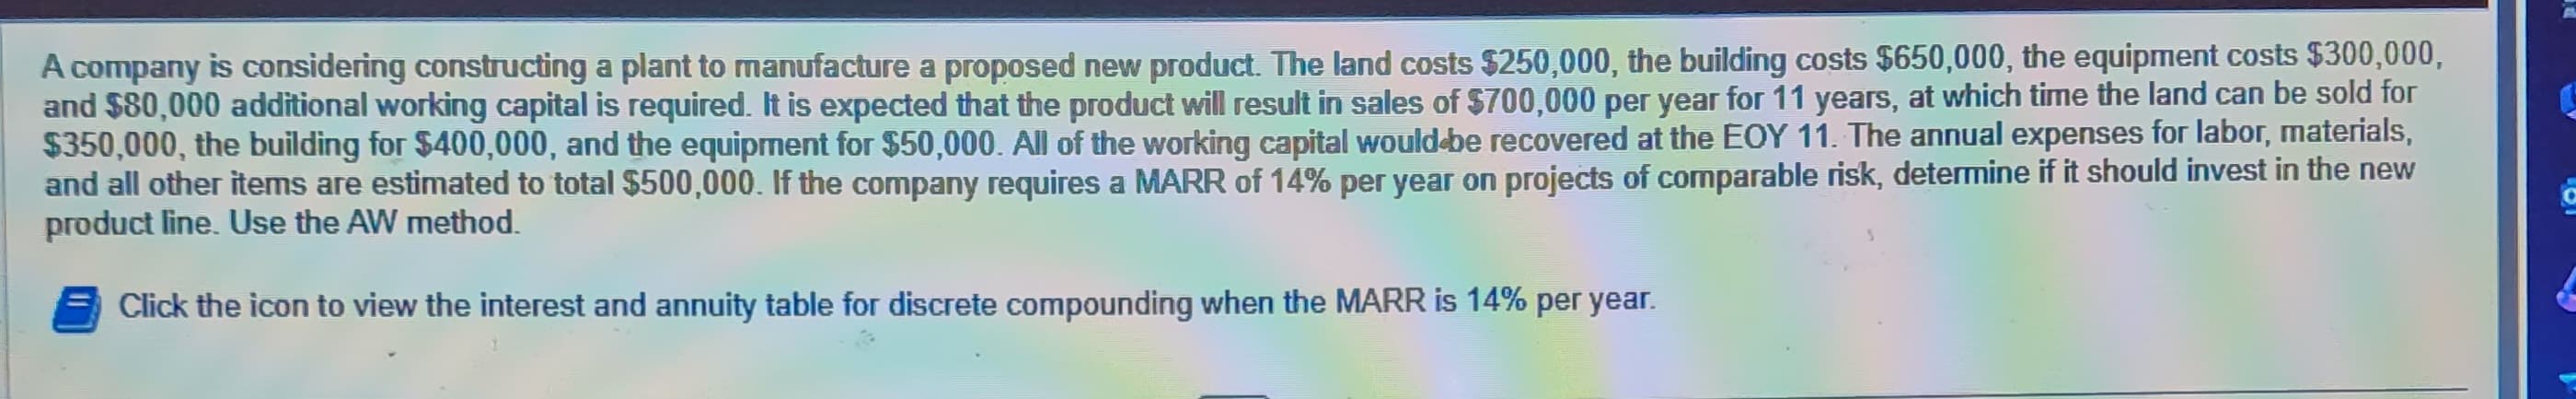 A company is considering constructing a plant to manufacture a proposed new product. The land costs $250,000, the building costs $650,000, the equipment costs $300,000,
and $80,000 additional working capital is required. It is expected that the product will result in sales of $700,000 per year for 11 years, at which time the land can be sold for
$350,000, the building for $400,000, and the equipment for $50,000. All of the working capital would-be recovered at the EOY 11. The annual expenses for labor, materials,
and all other items are estimated to total $500,000. If the company requires a MARR of 14% per year on projects of comparable risk, determine if it should invest in the new
product line. Use the AW method.
Click the icon to view the interest and annuity table for discrete compounding when the MARR is 14% per year.